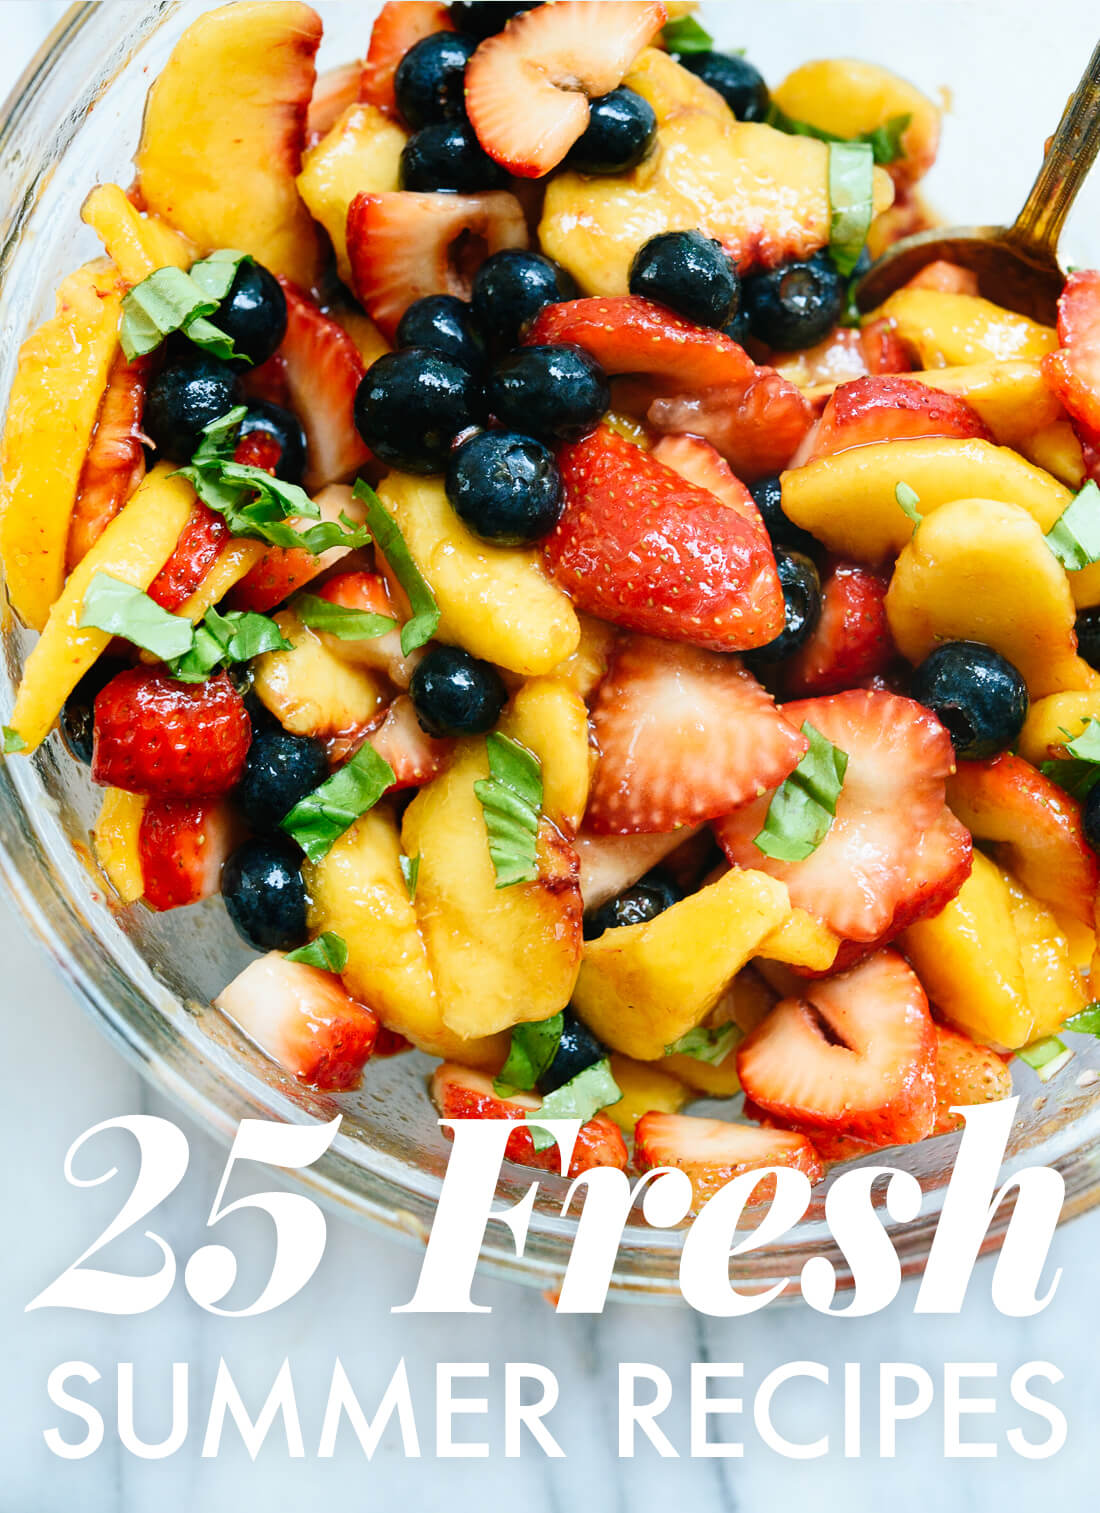 Make these 25 fresh recipes before summer ends! See them all at cookieandkate.com